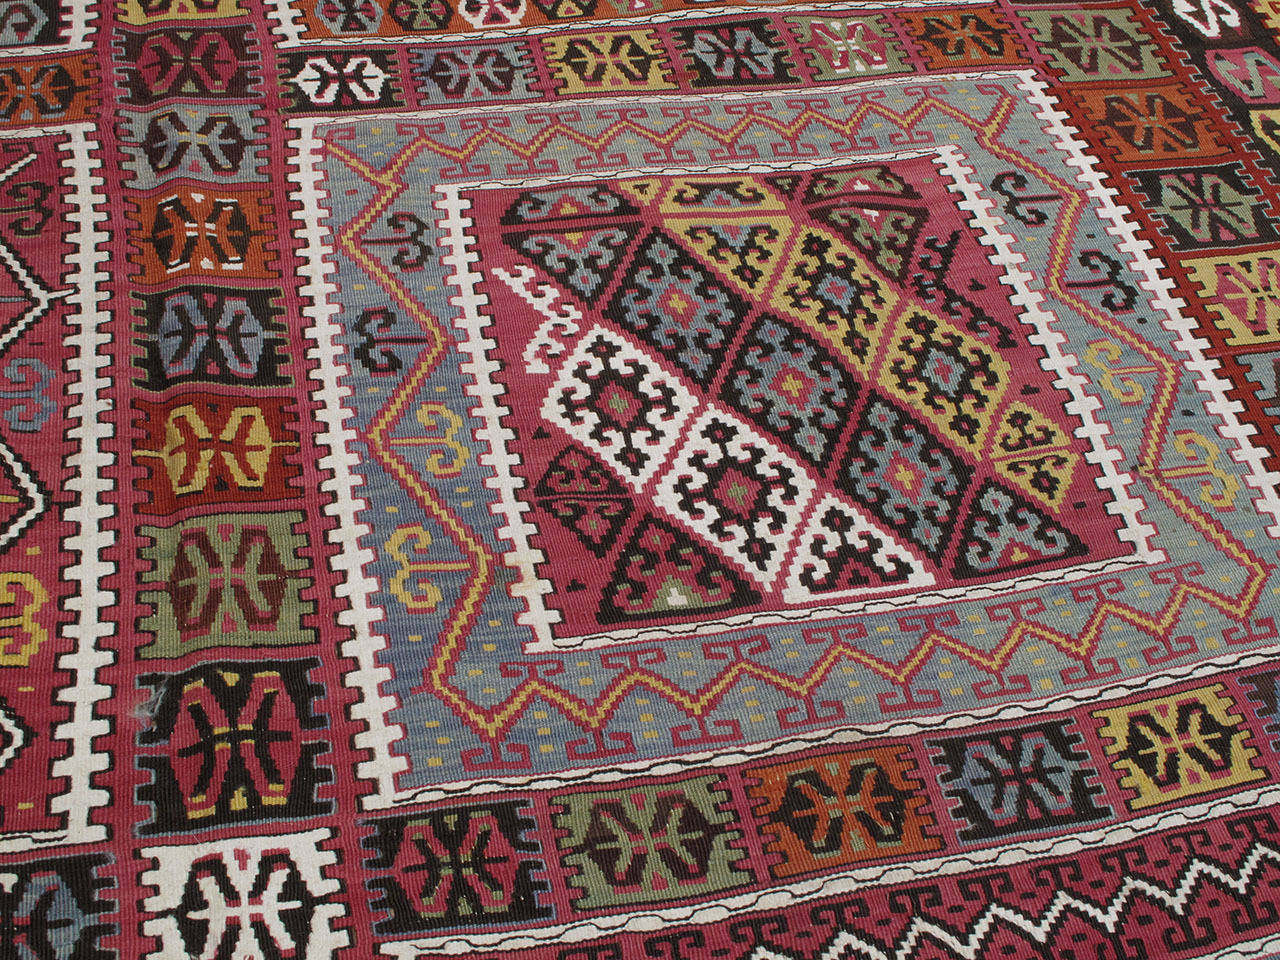 Superb Antique Bayburt Kilim Rug In Excellent Condition For Sale In New York, NY